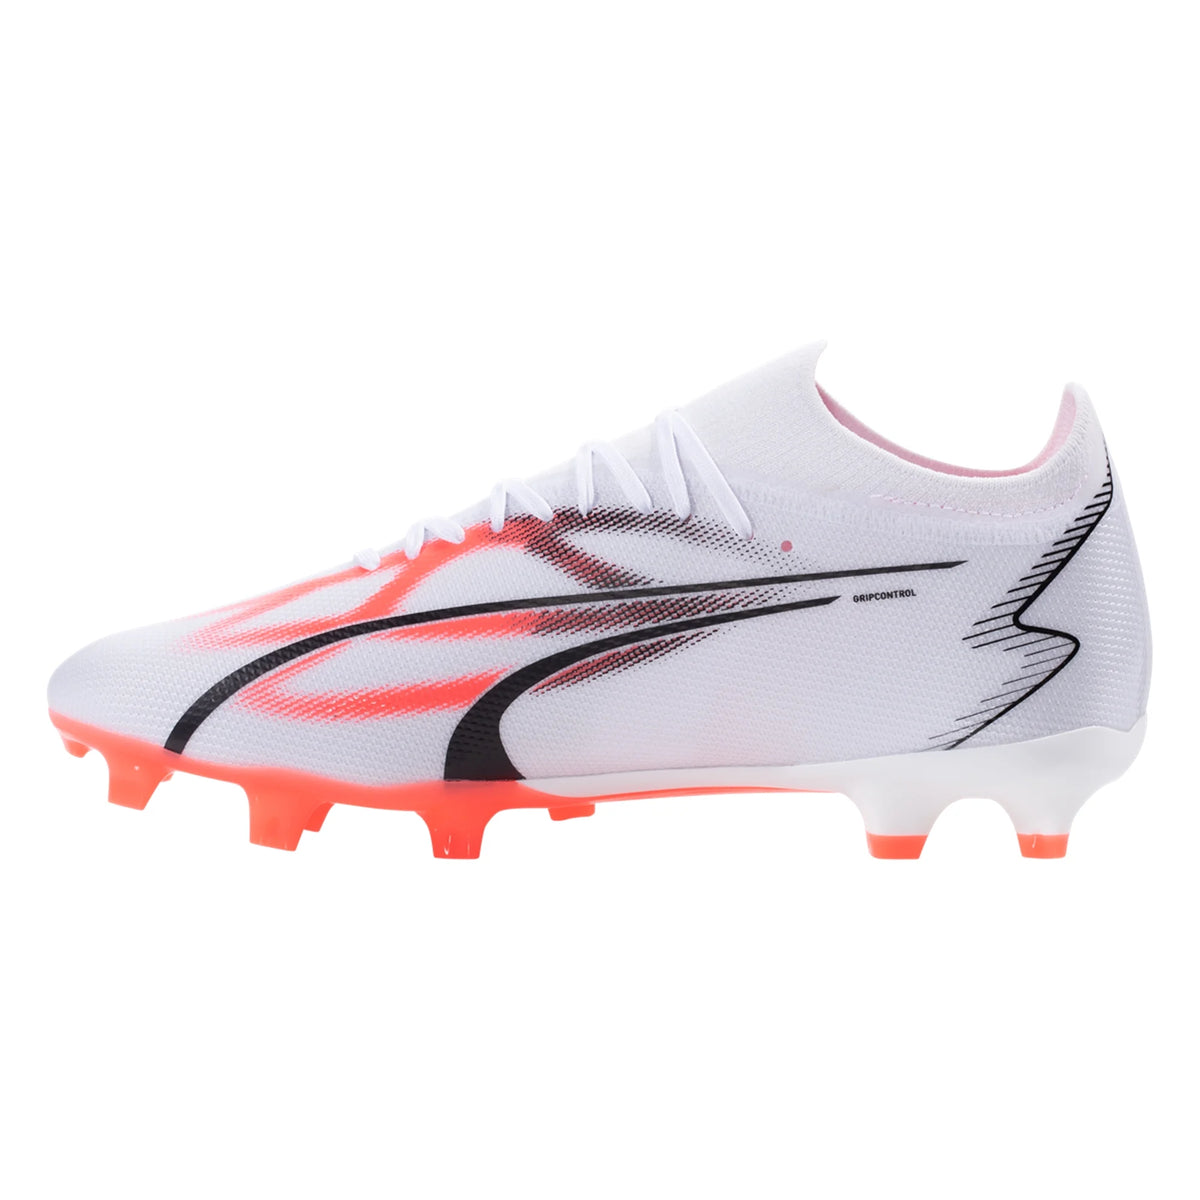 Puma Ultra Match FG/AG USA White/Black/Fire Cleat Soccer Orchid – - Zone 107347-01 Ground Firm Soccer